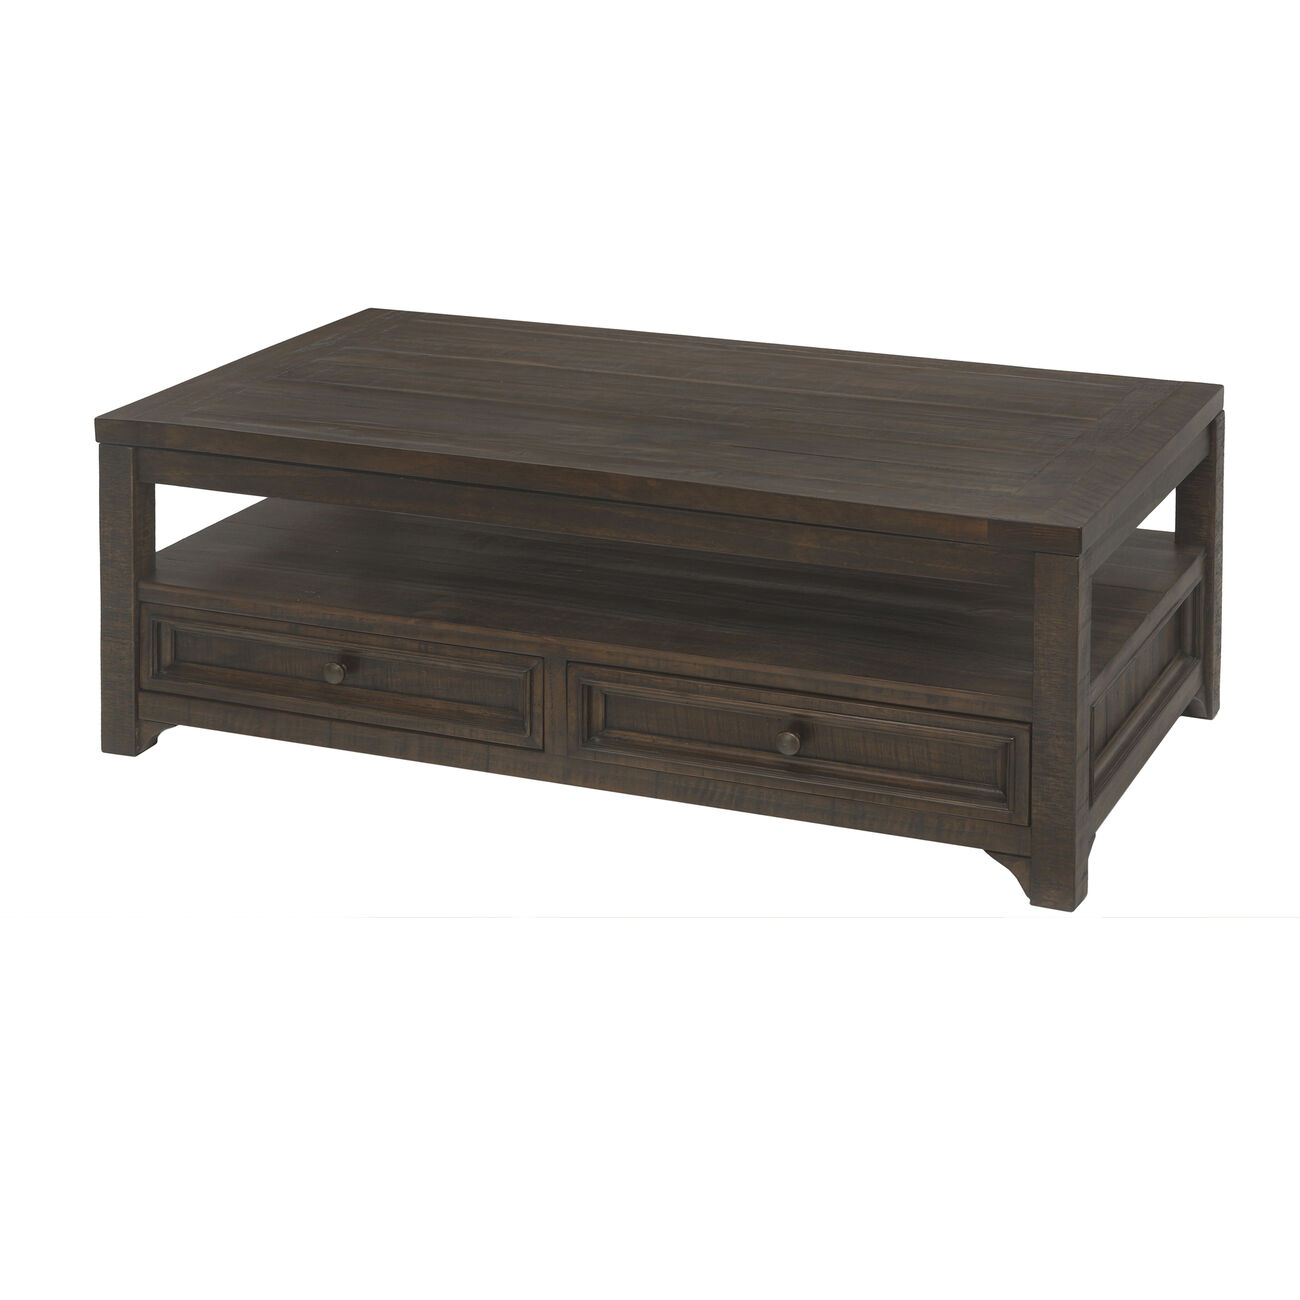 Rectangular Wooden Lift Top Coffee Table with 2 Drawers, Brown